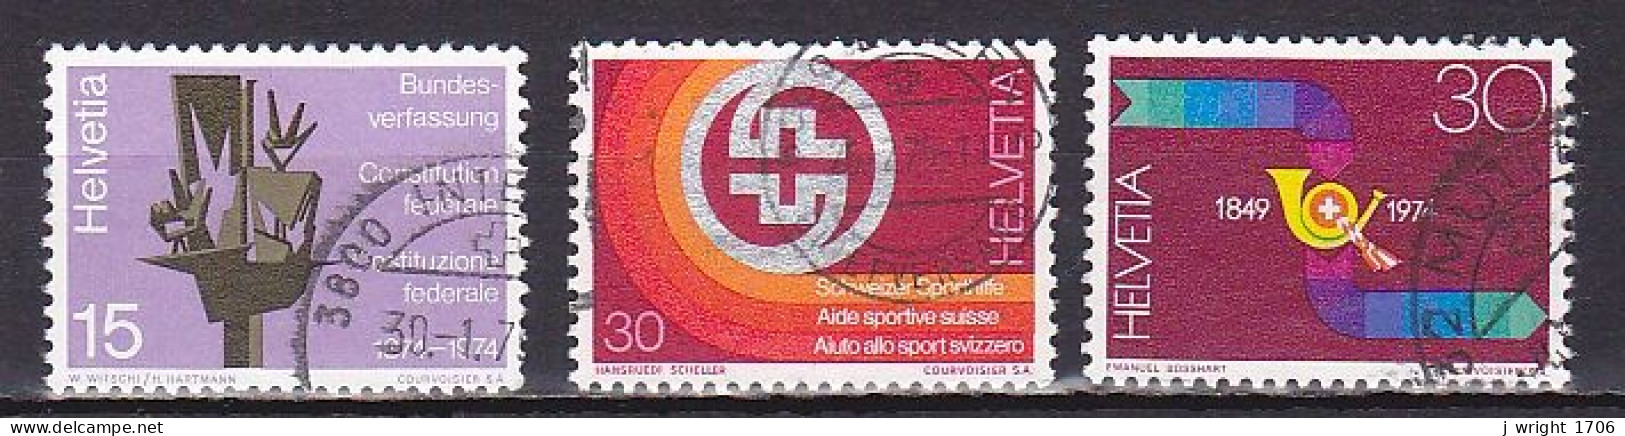 Switzerland, 1974, Publicity Issue, Set, USED - Used Stamps